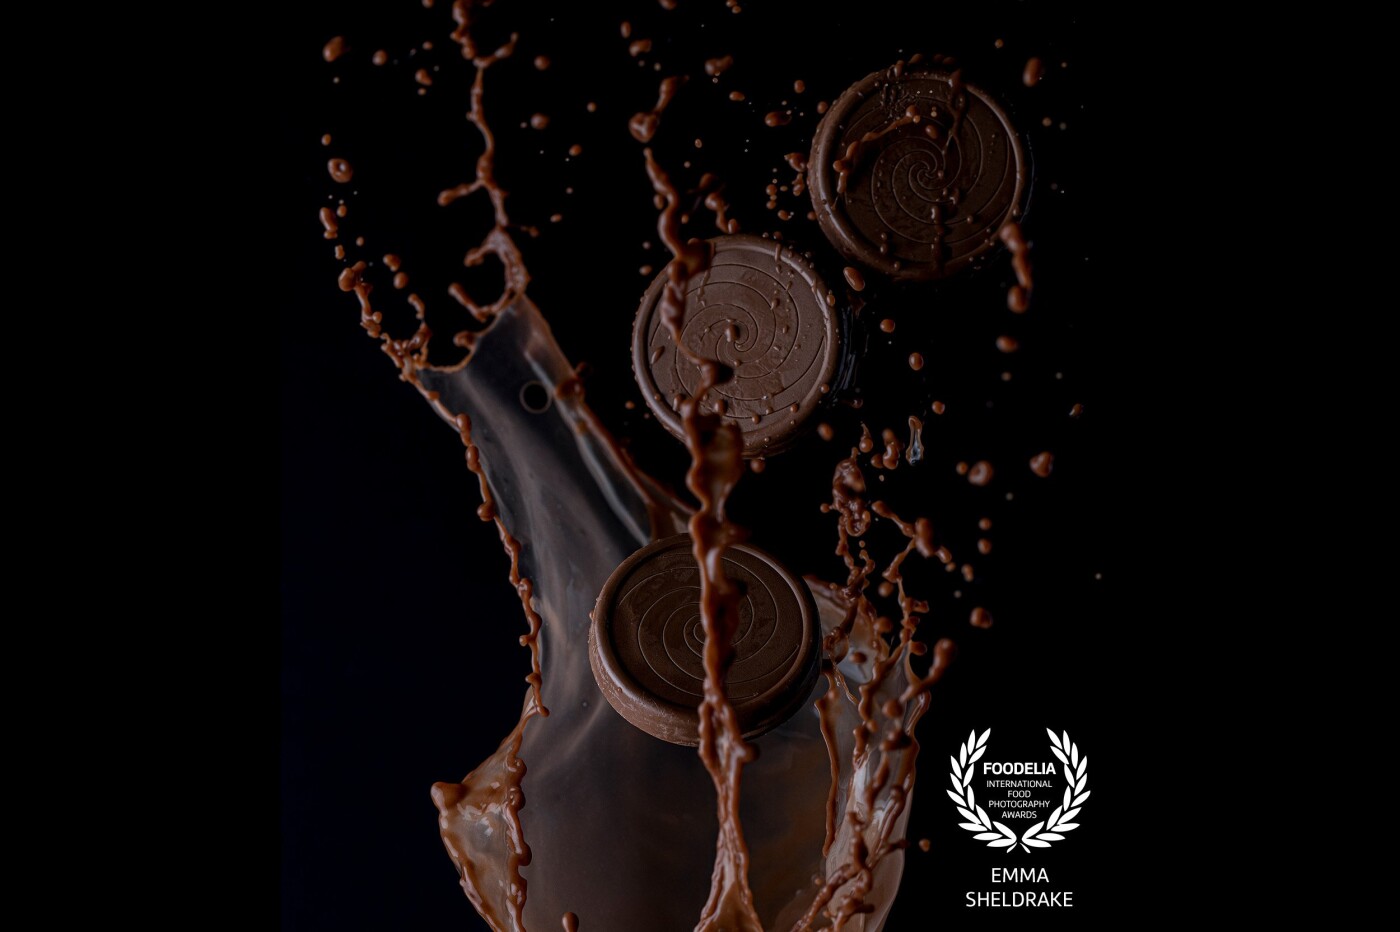 Inspired by the many chocolate scenes in ‘Willy Wonka and the Chocolate Factory’ this is a chocolate lovers' dream! I created this splash in reverse by pouring the liquid and suspending the elements and then flipping the scene. 